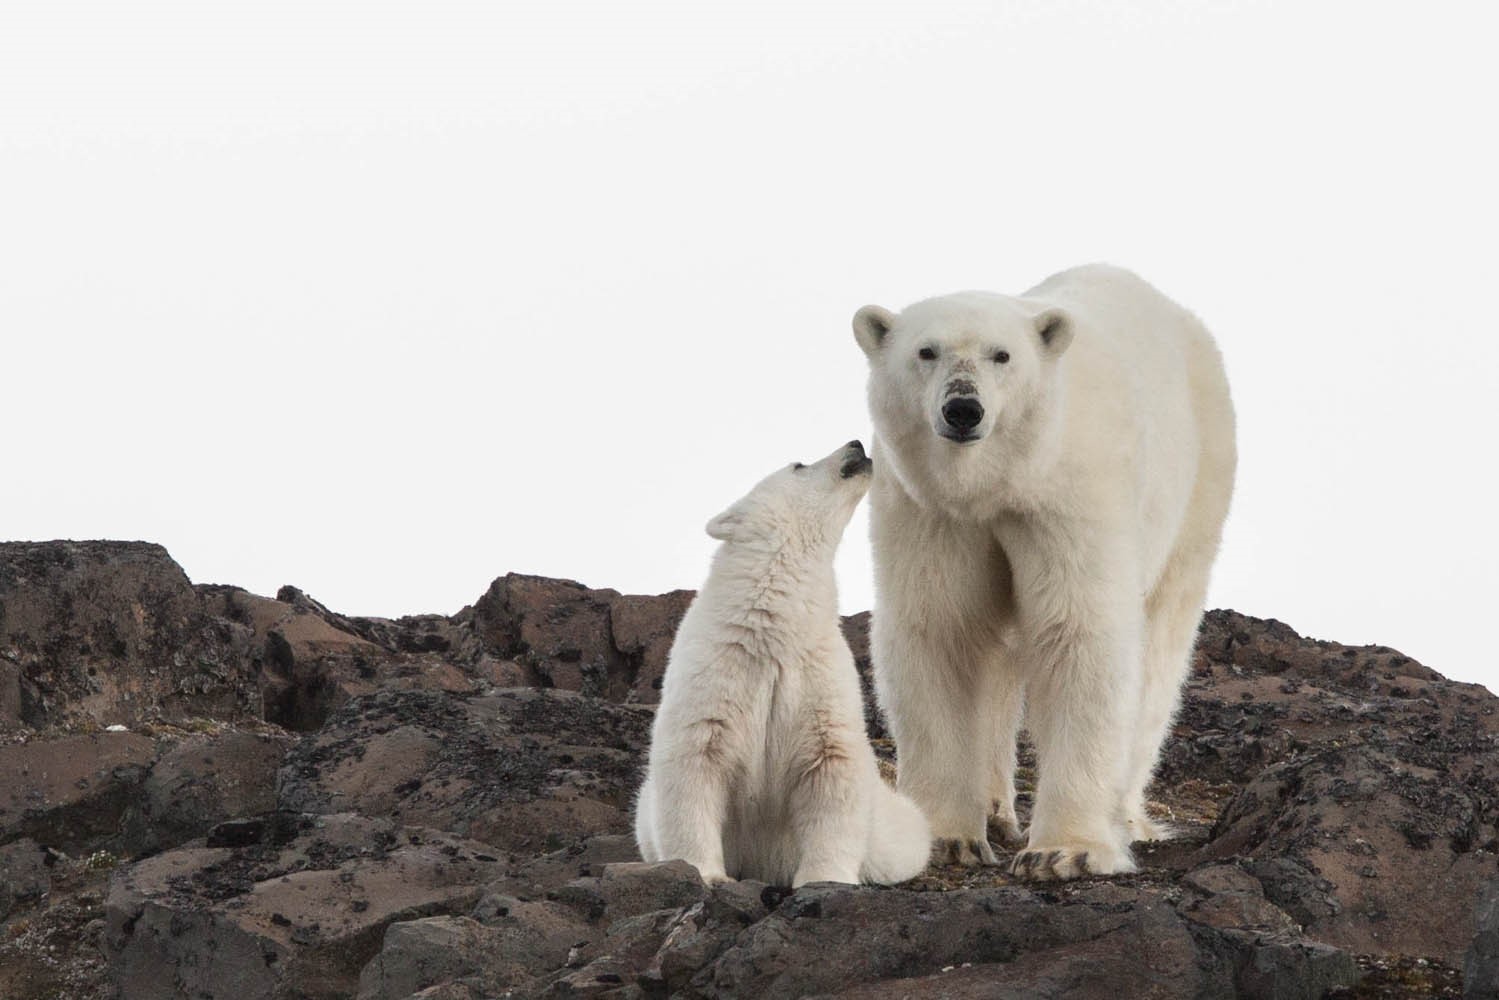 A mama polar bear and her cub caught on camera during an Arctic voyage with Quark Expeditions.